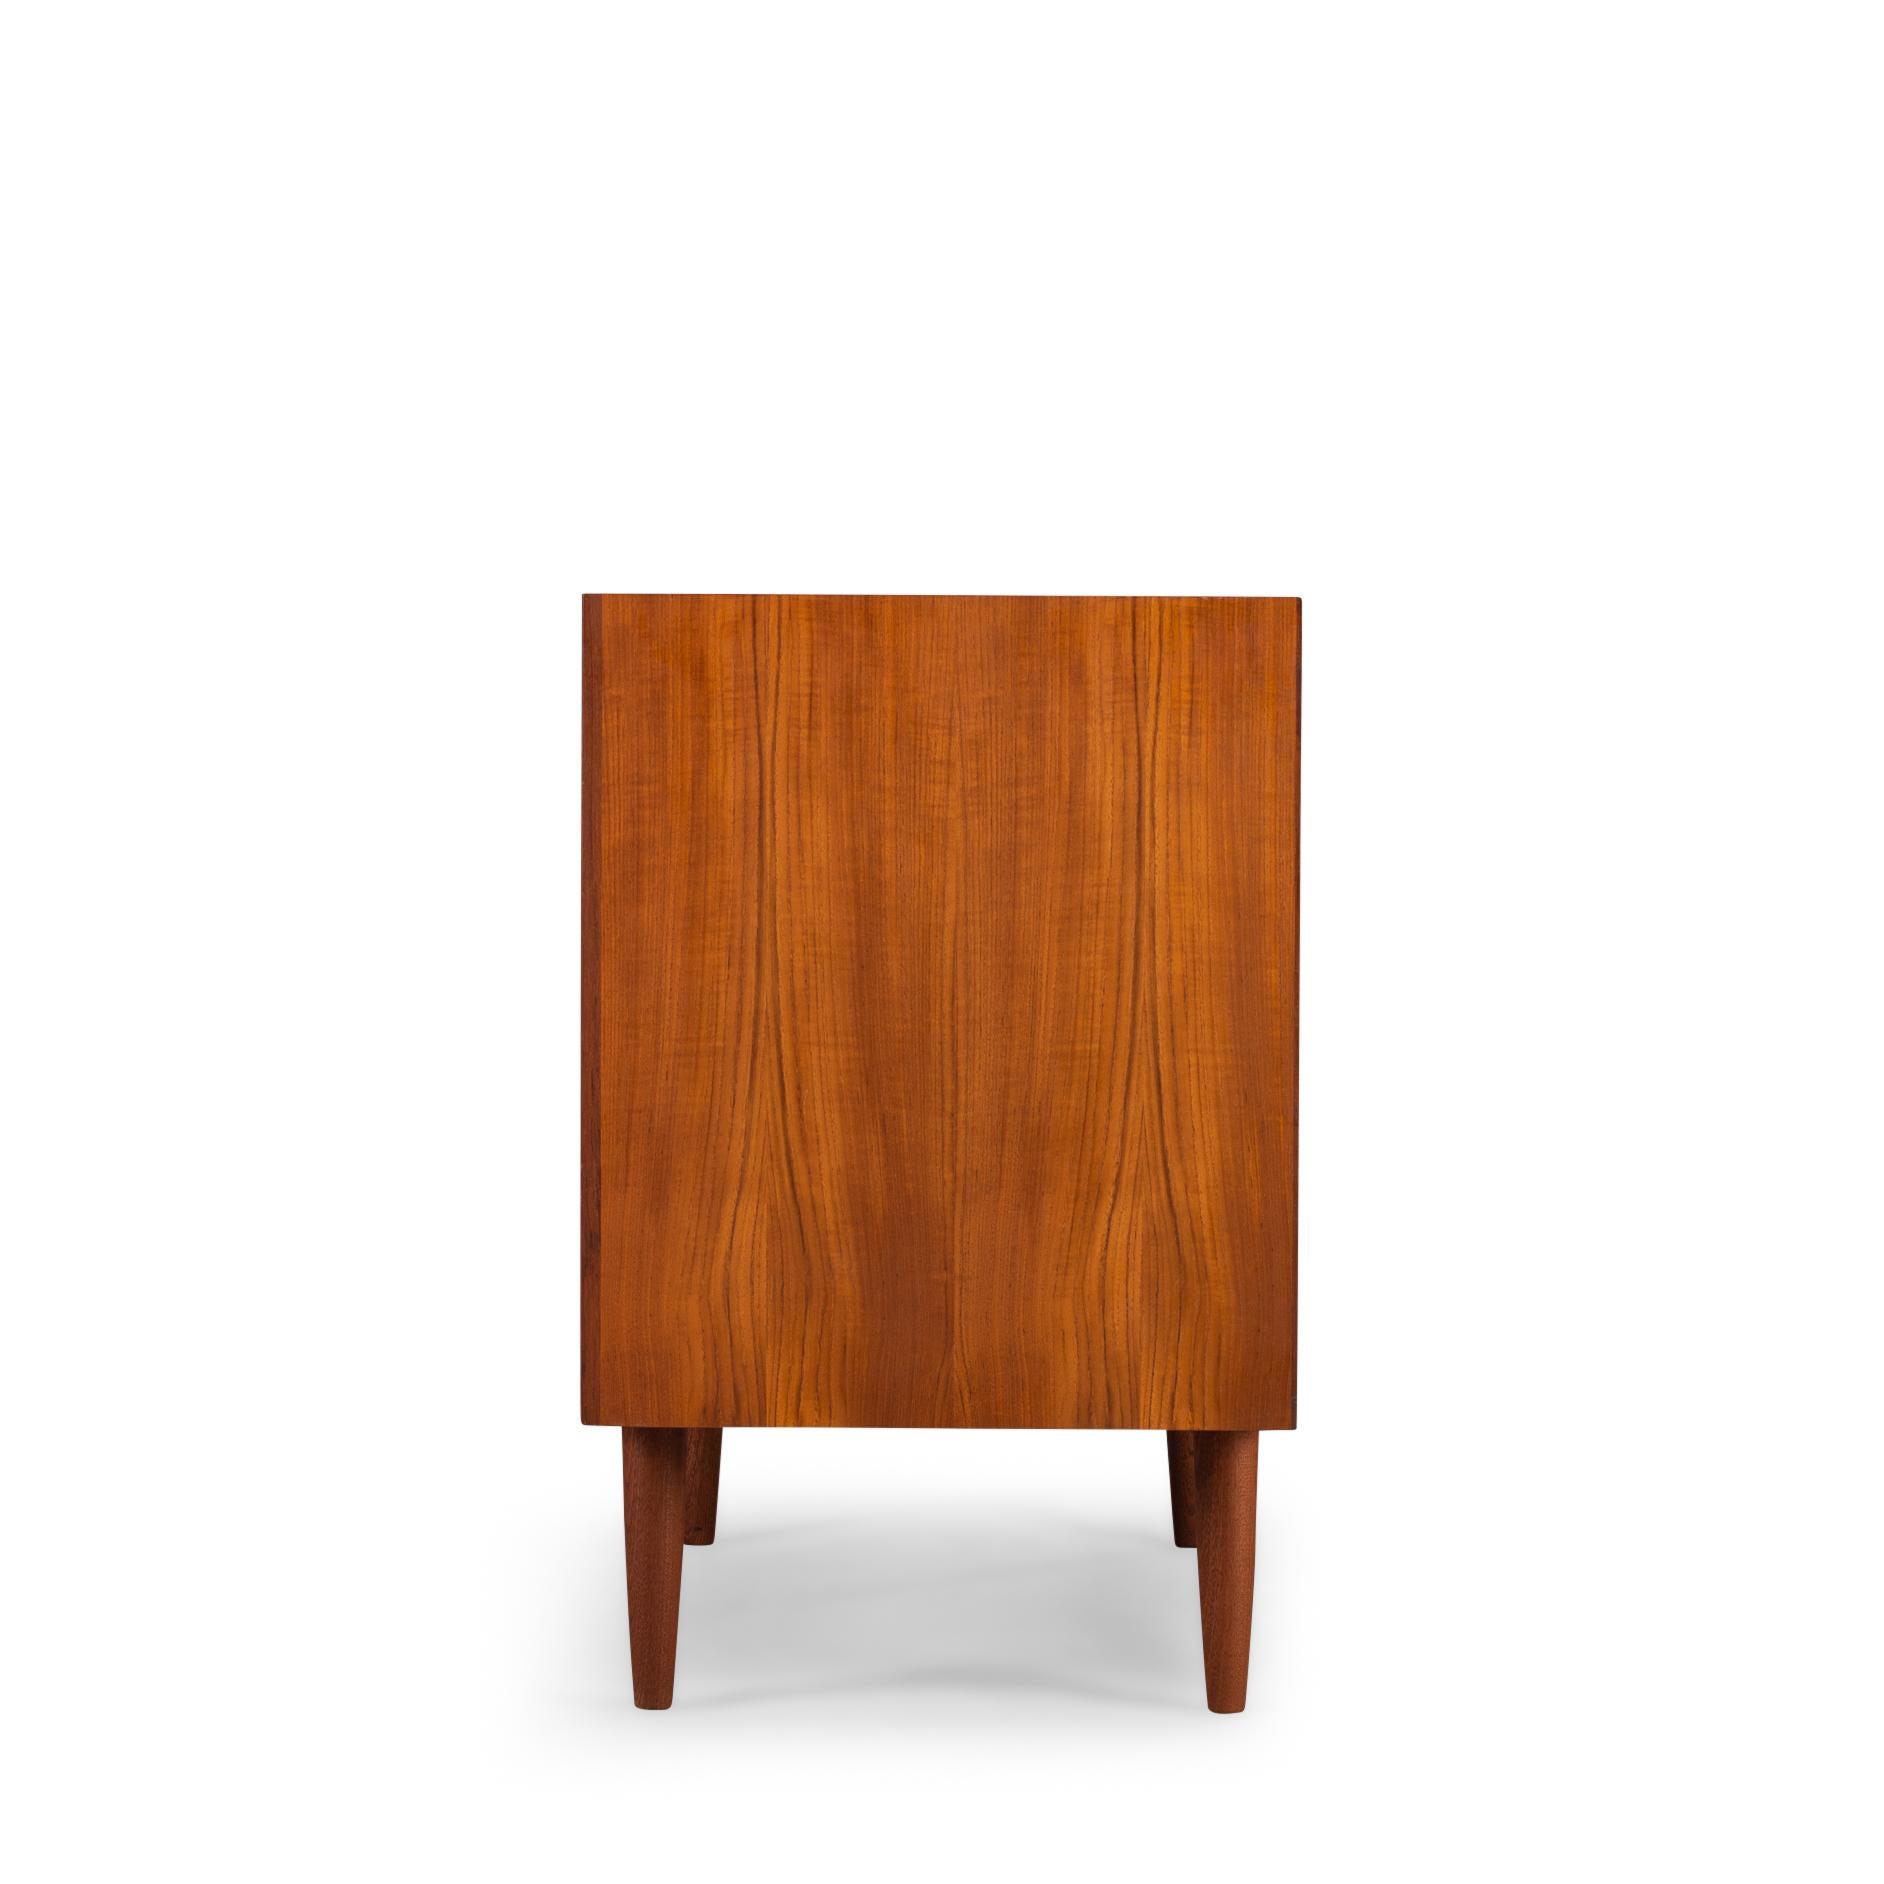 Small teak chest of drawers that can function well as sideboard designed by E. Brouer and manufactured by Brouer Møbelfabrik. An eye-catcher in every hallway, study or living! This sideboard has a whopping amount of drawers, ten in total all